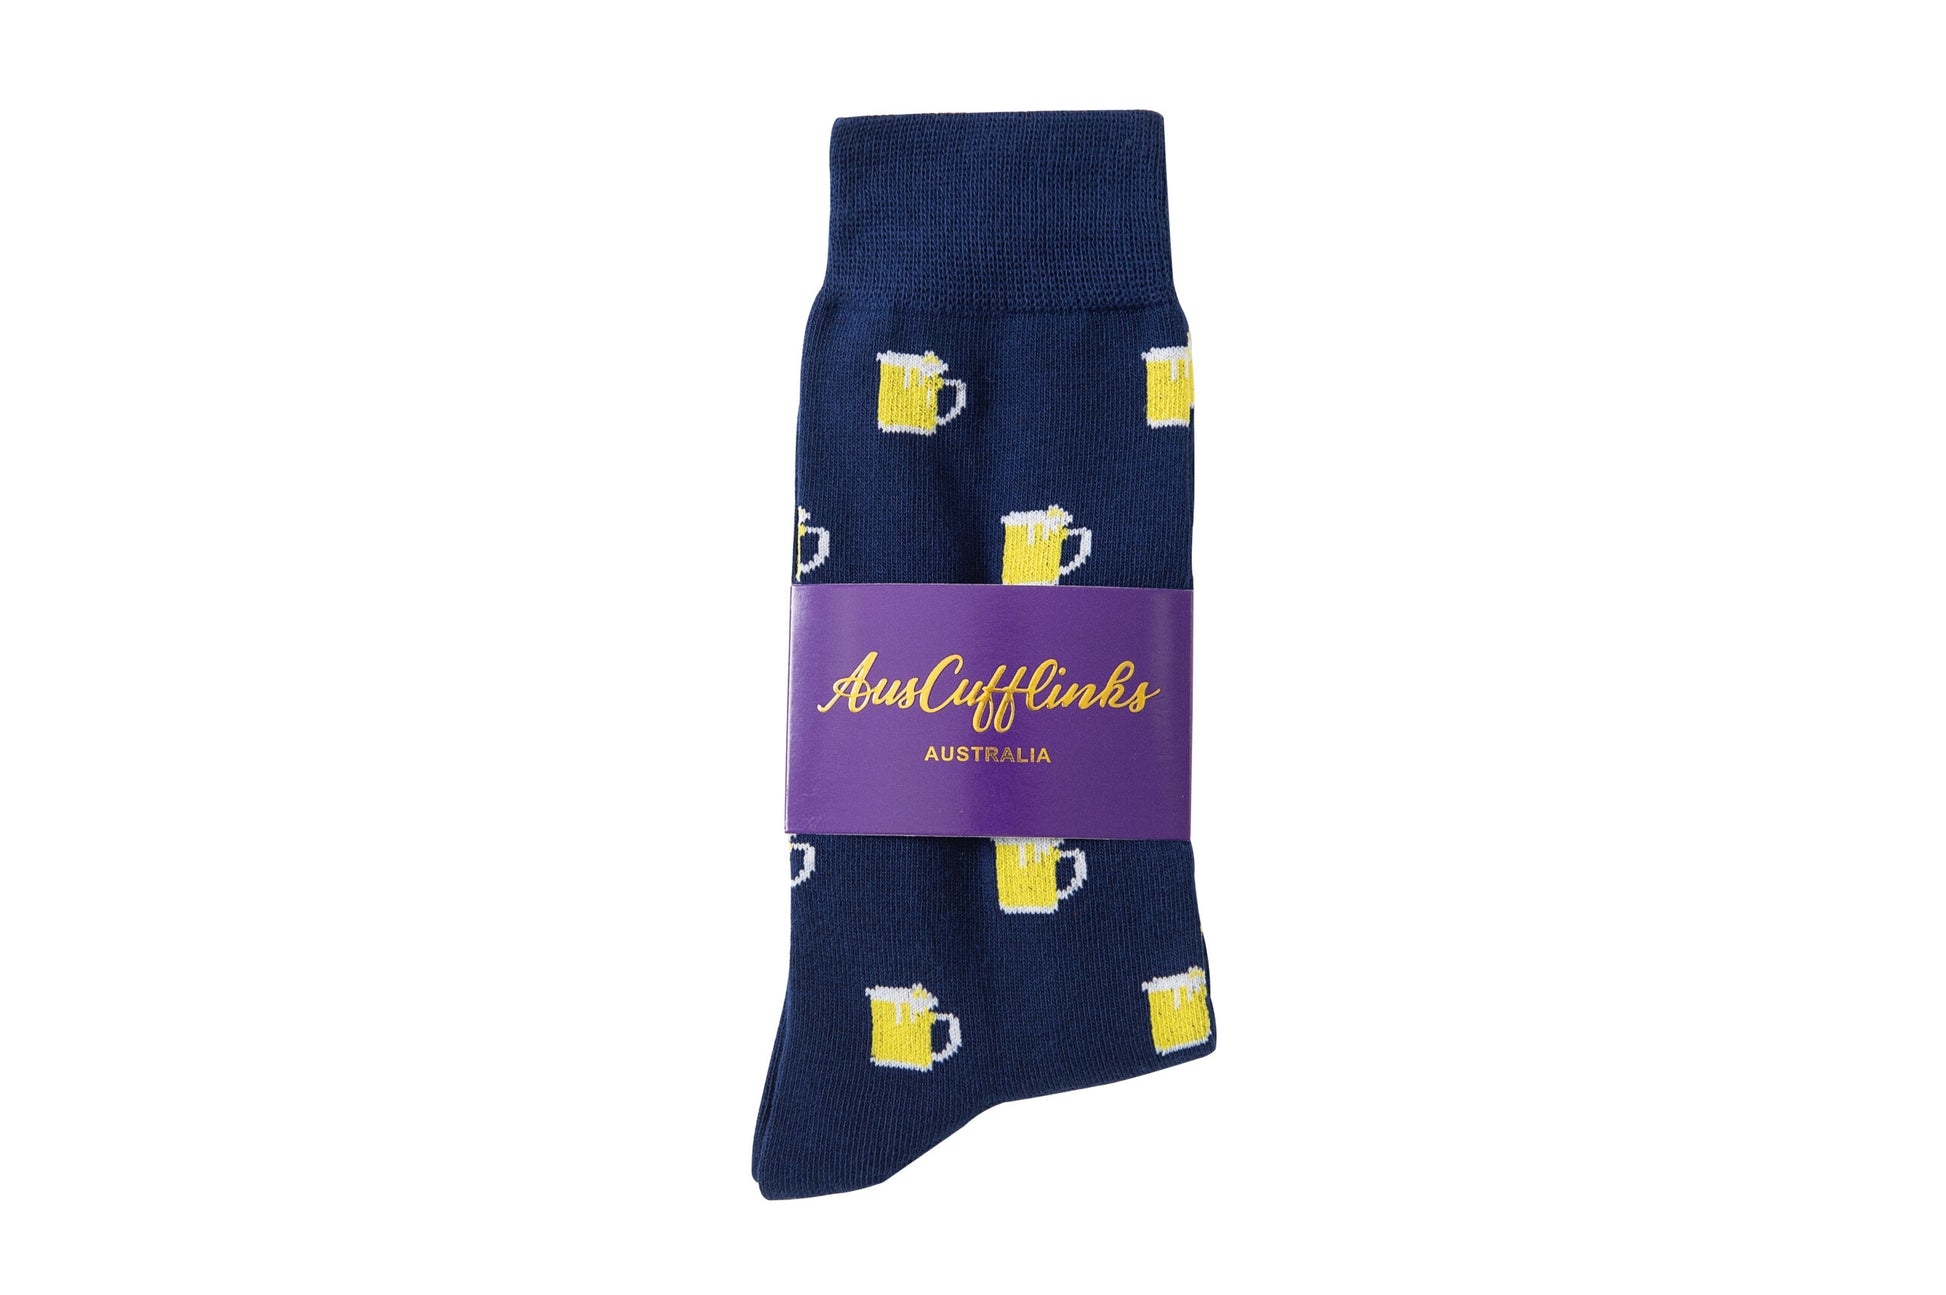 A blue sock with yellow and white Beer Socks on it.